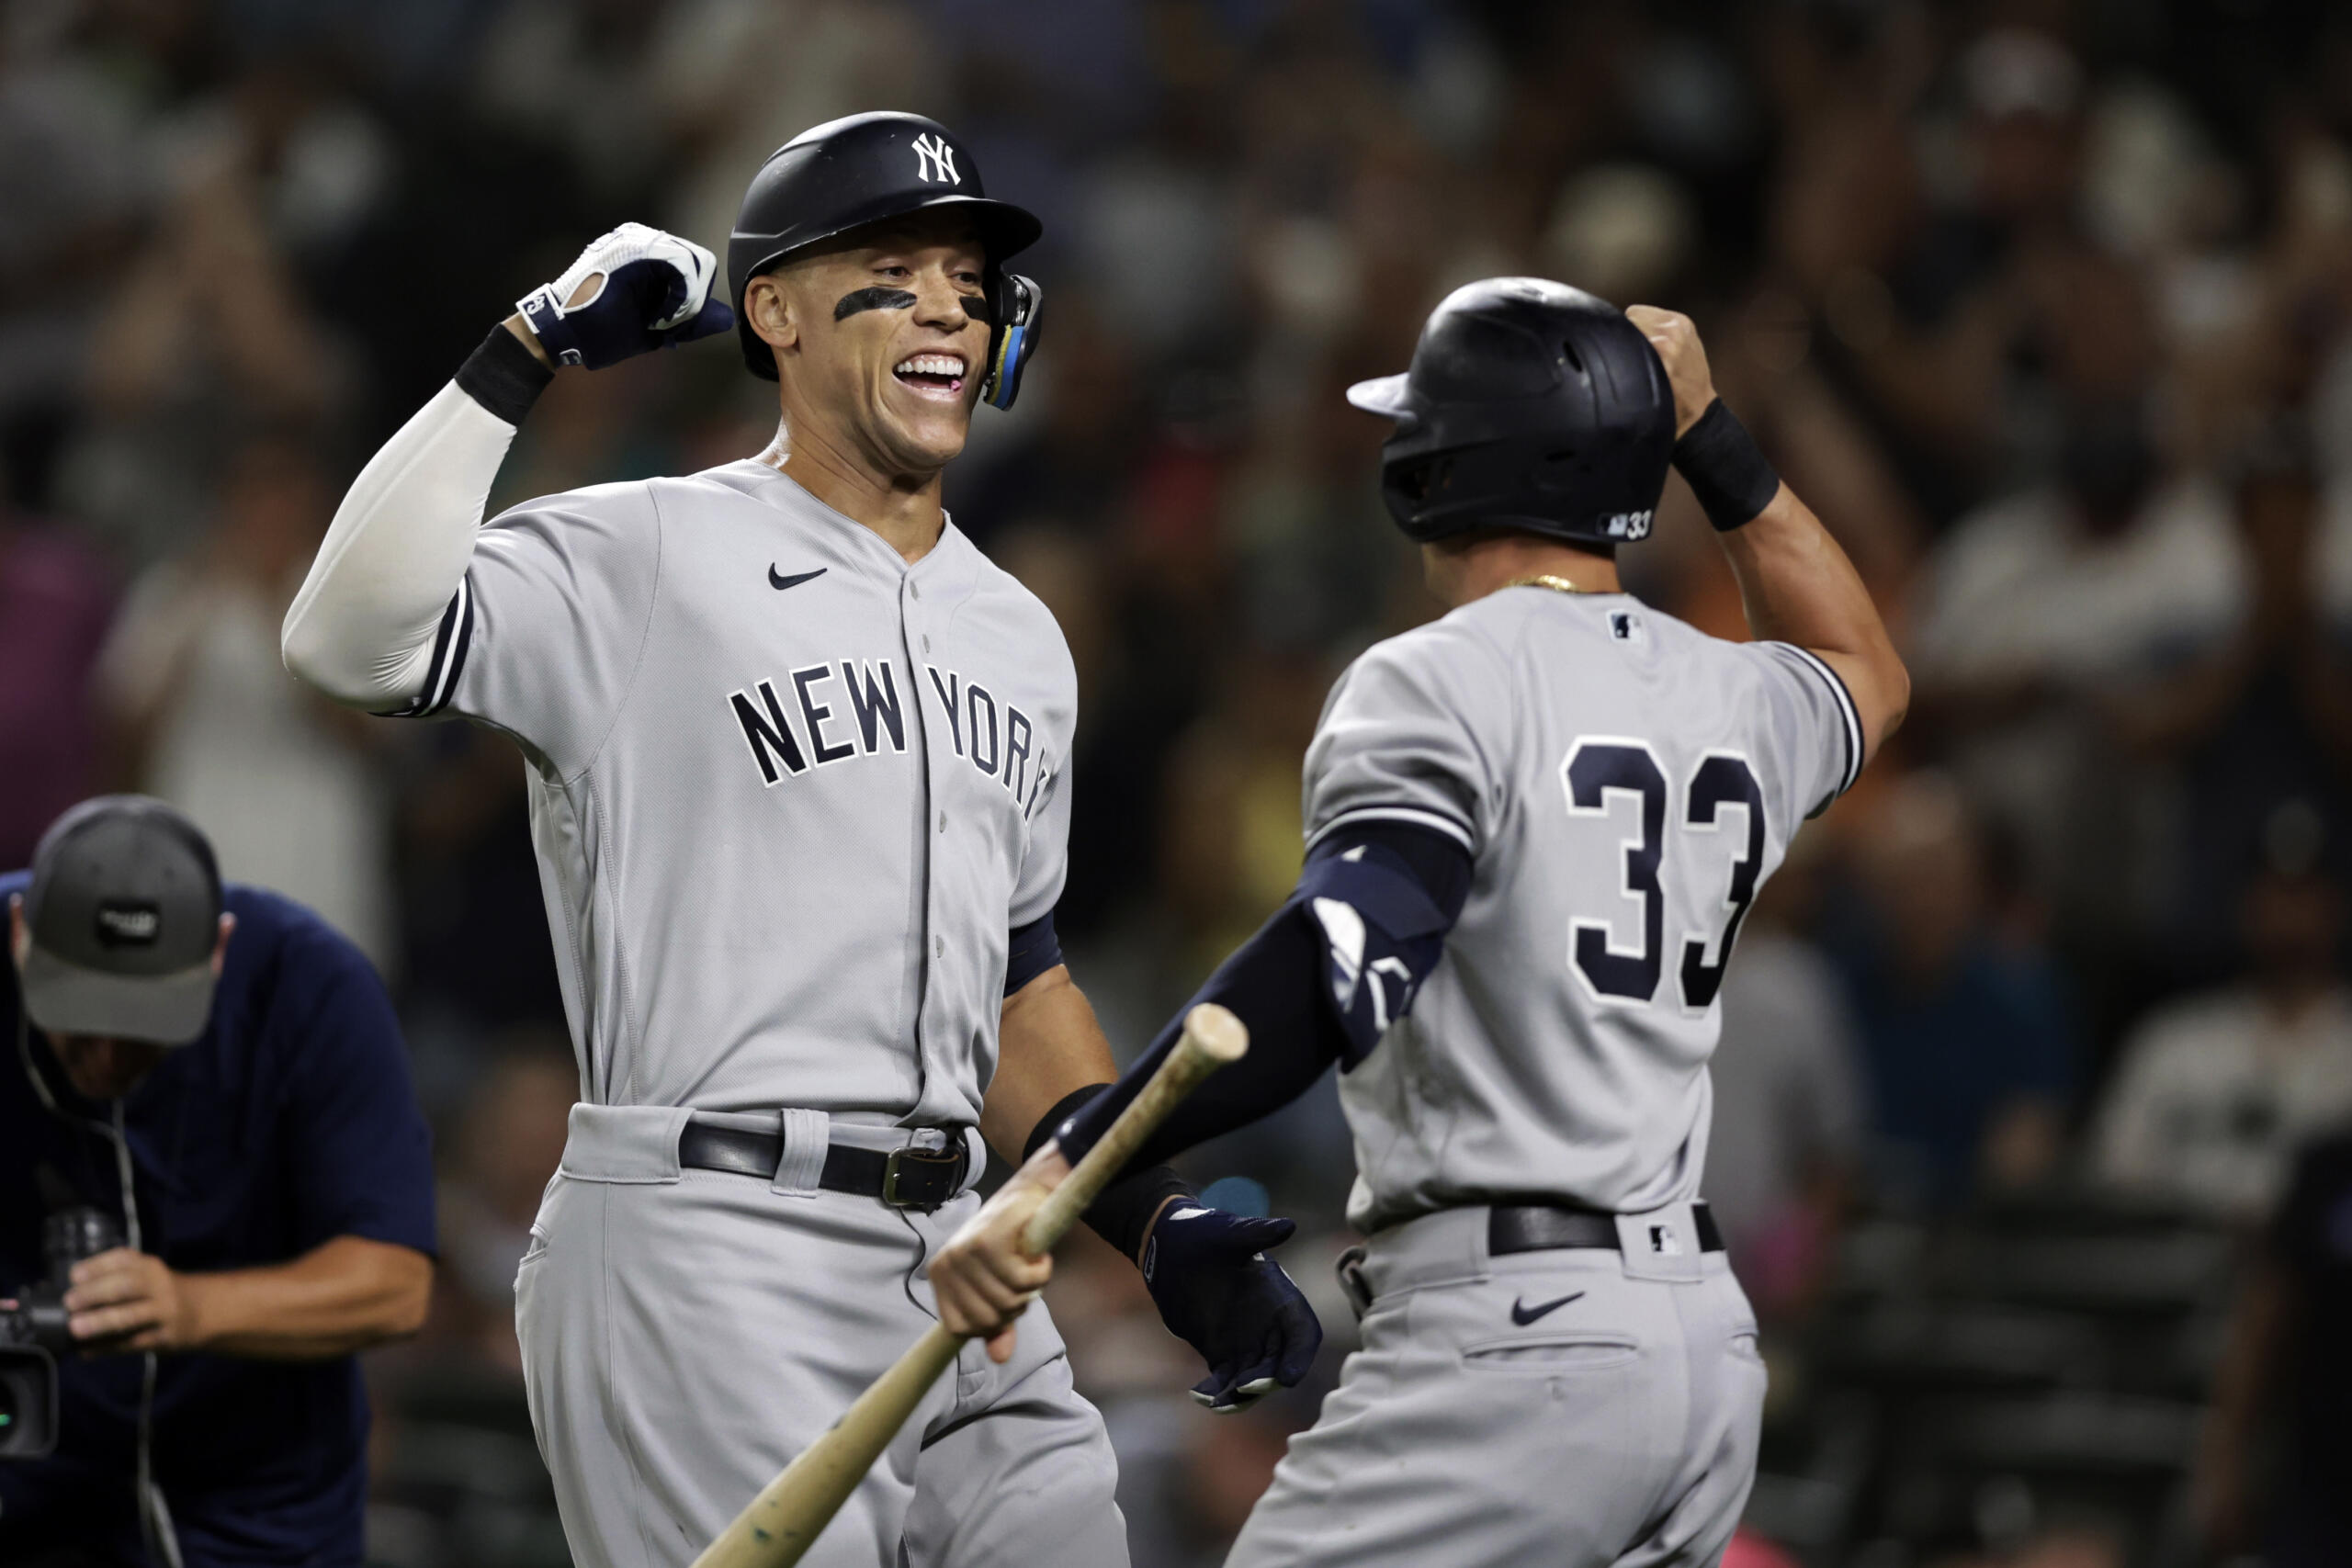 New York Yankees' Aaron Judge celebrates with Tim Locastro after hitting a solo home run on a pitch from Seattle Mariners' Ryan Borucki during the ninth inning of a baseball game, Monday, Aug. 8, 2022, in Seattle.